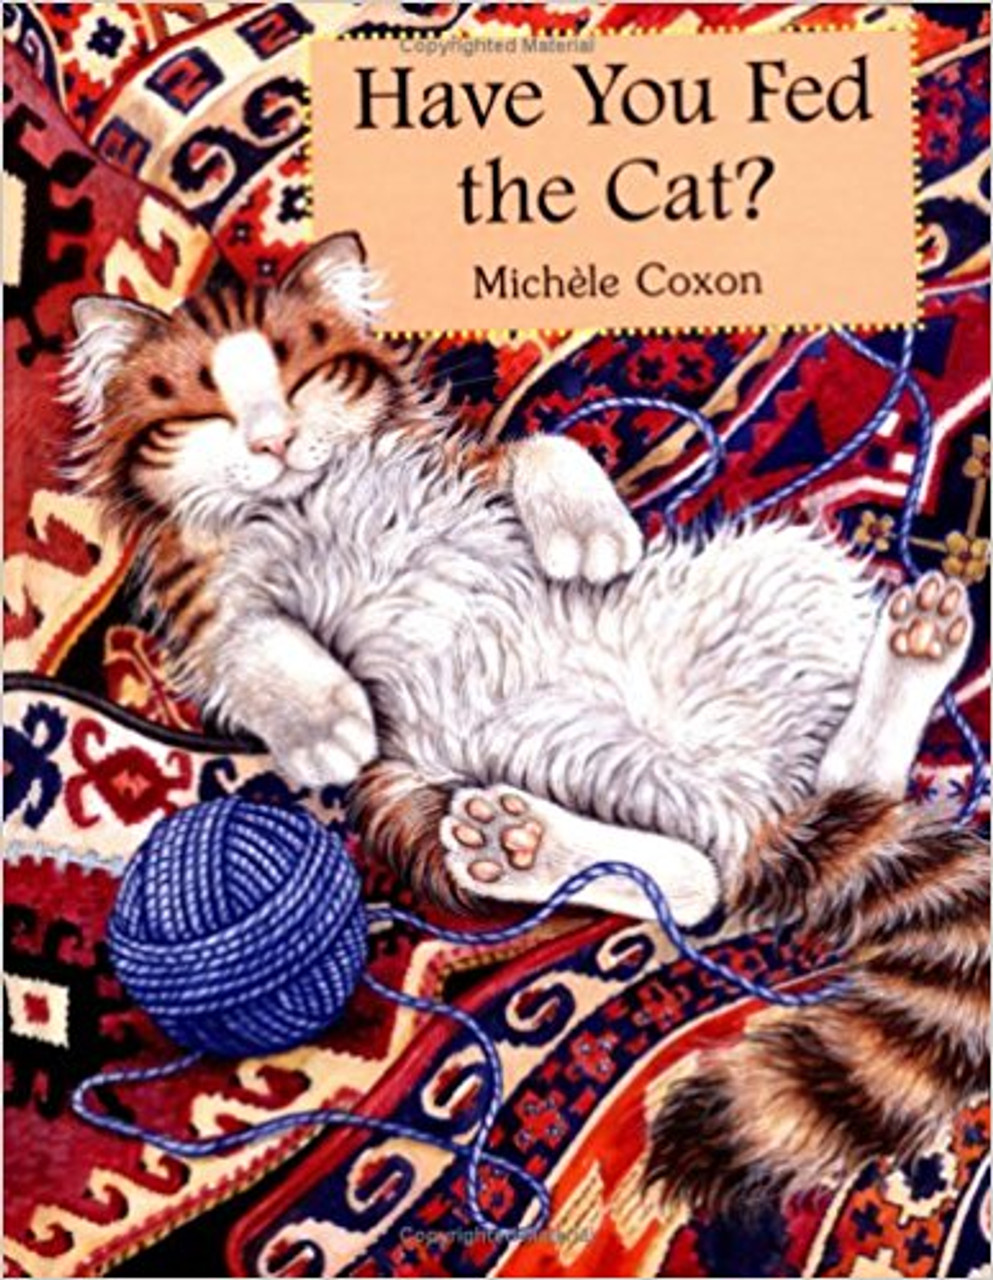 Have You Fed the Cat? by Michele Coxon